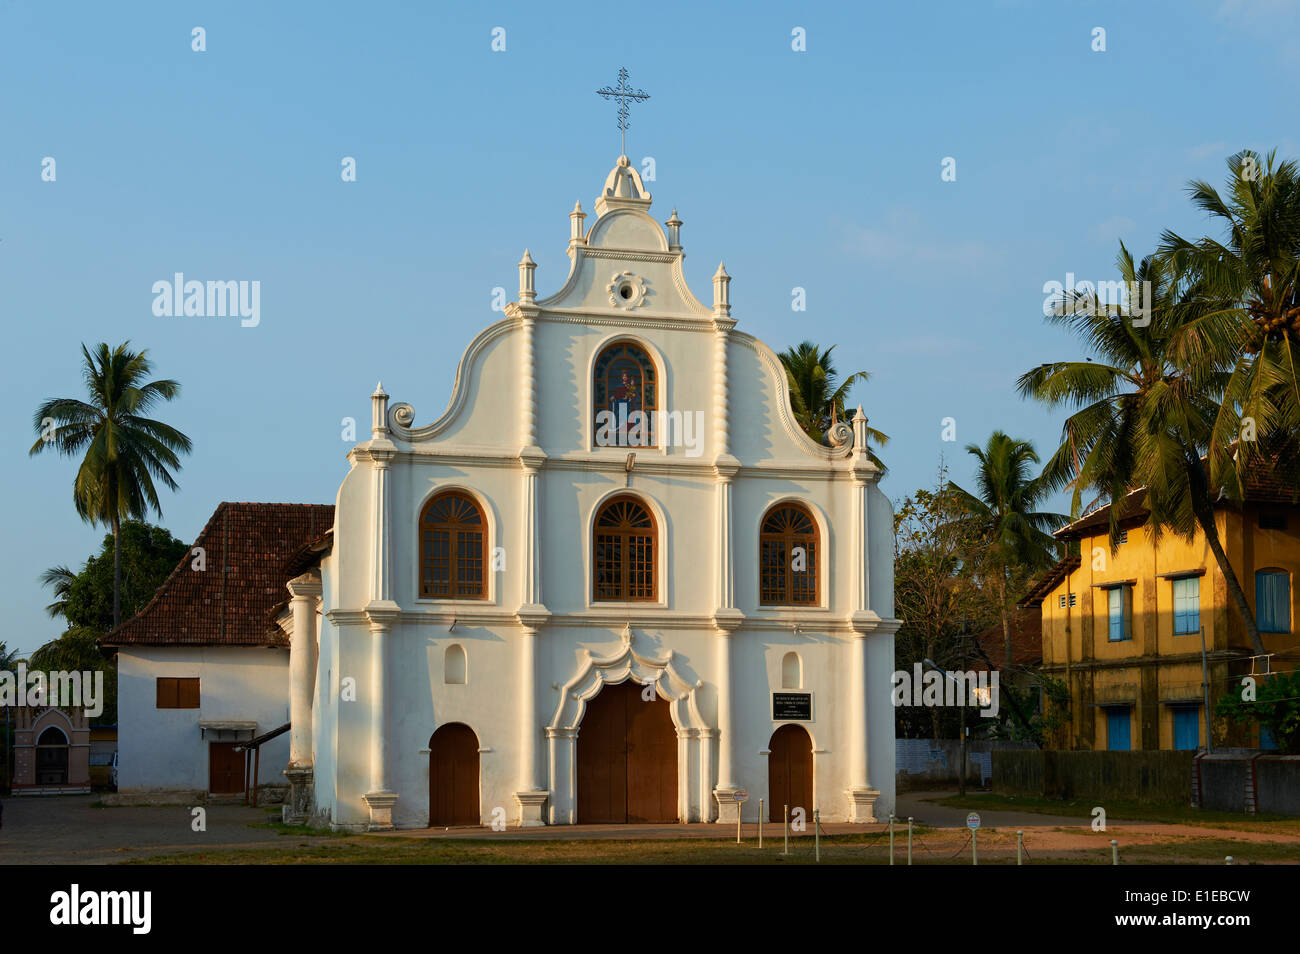 India Kerala State, Fort Cochin or Kochi, Vypin island, Church of our Lady of Hope Stock Photo